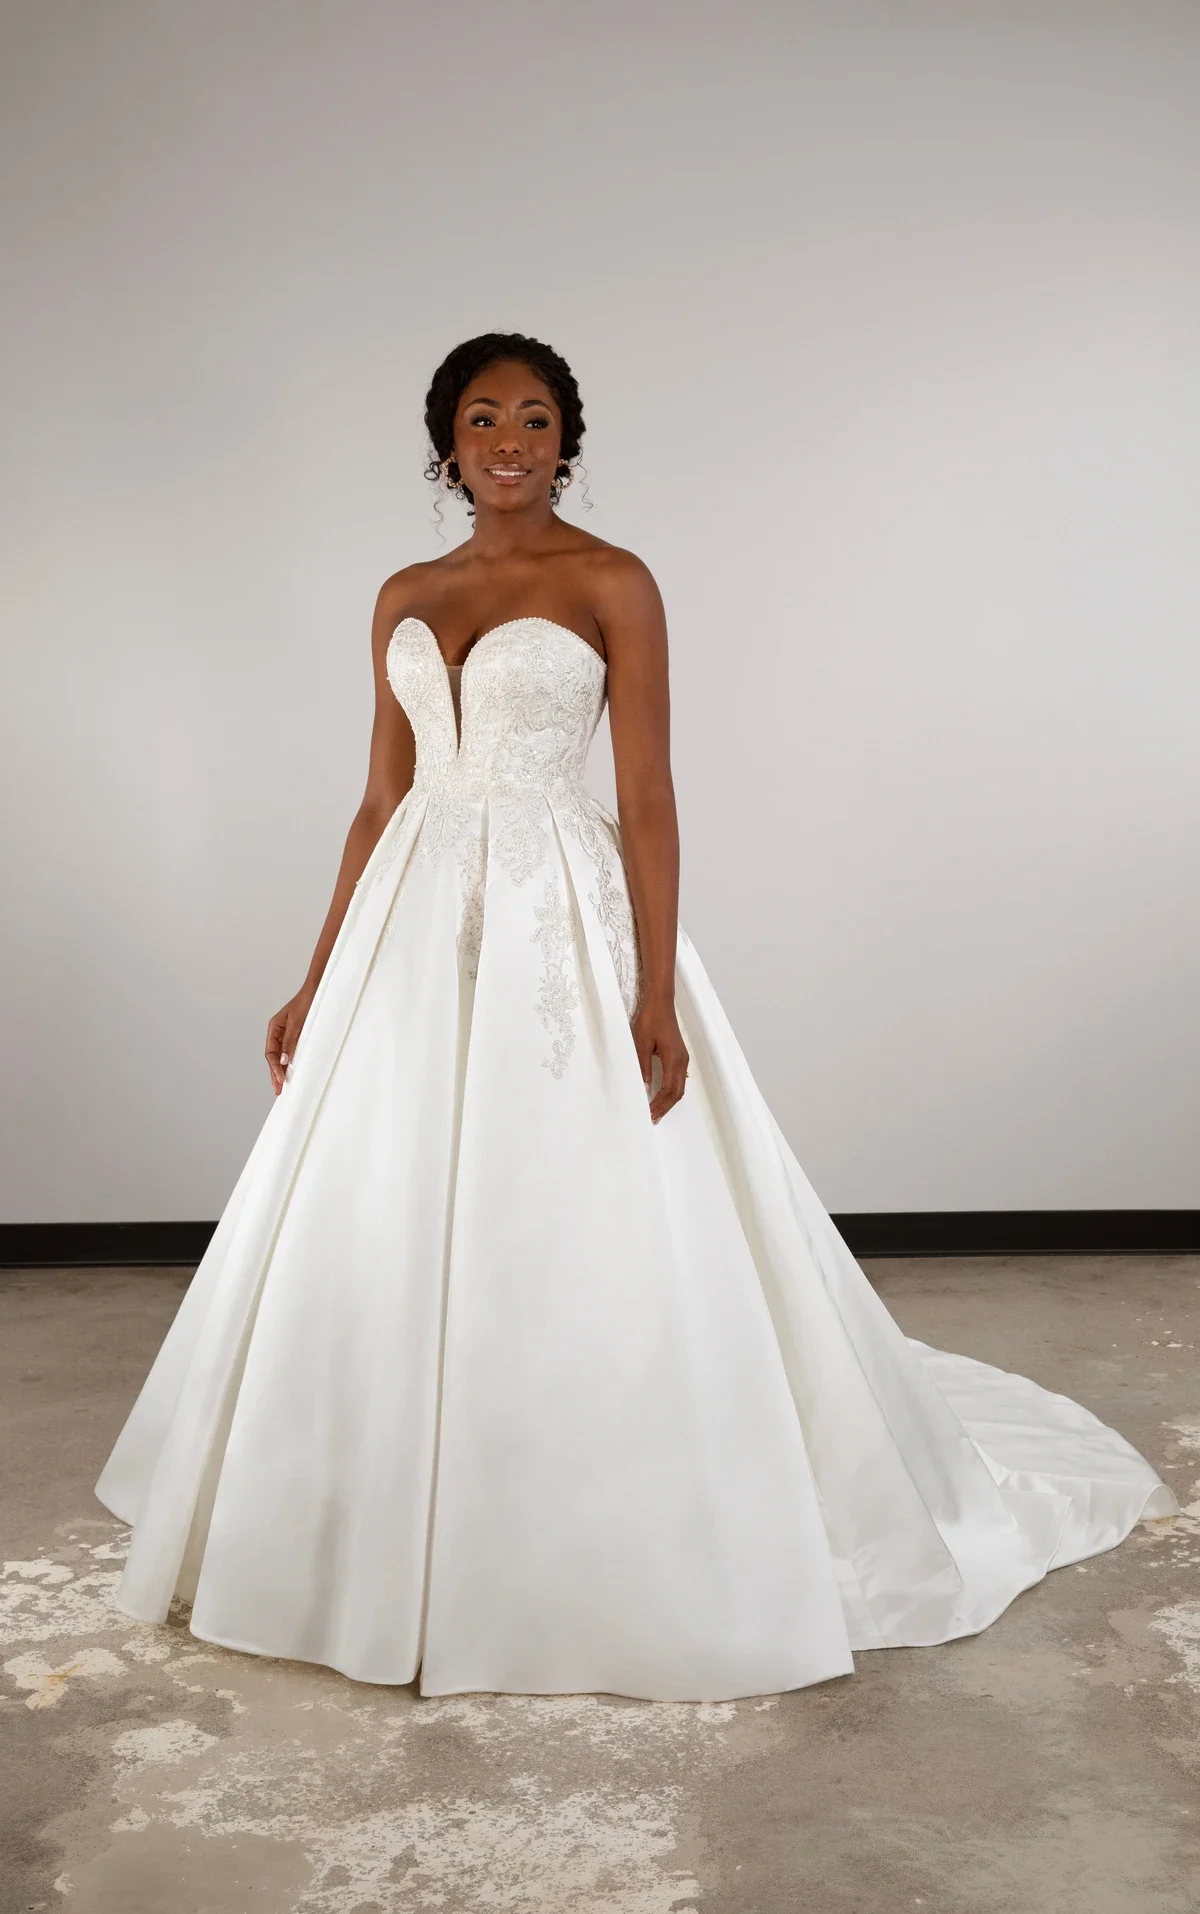 Regal Strapless Ball Gown by Essense of Australia - Image 1